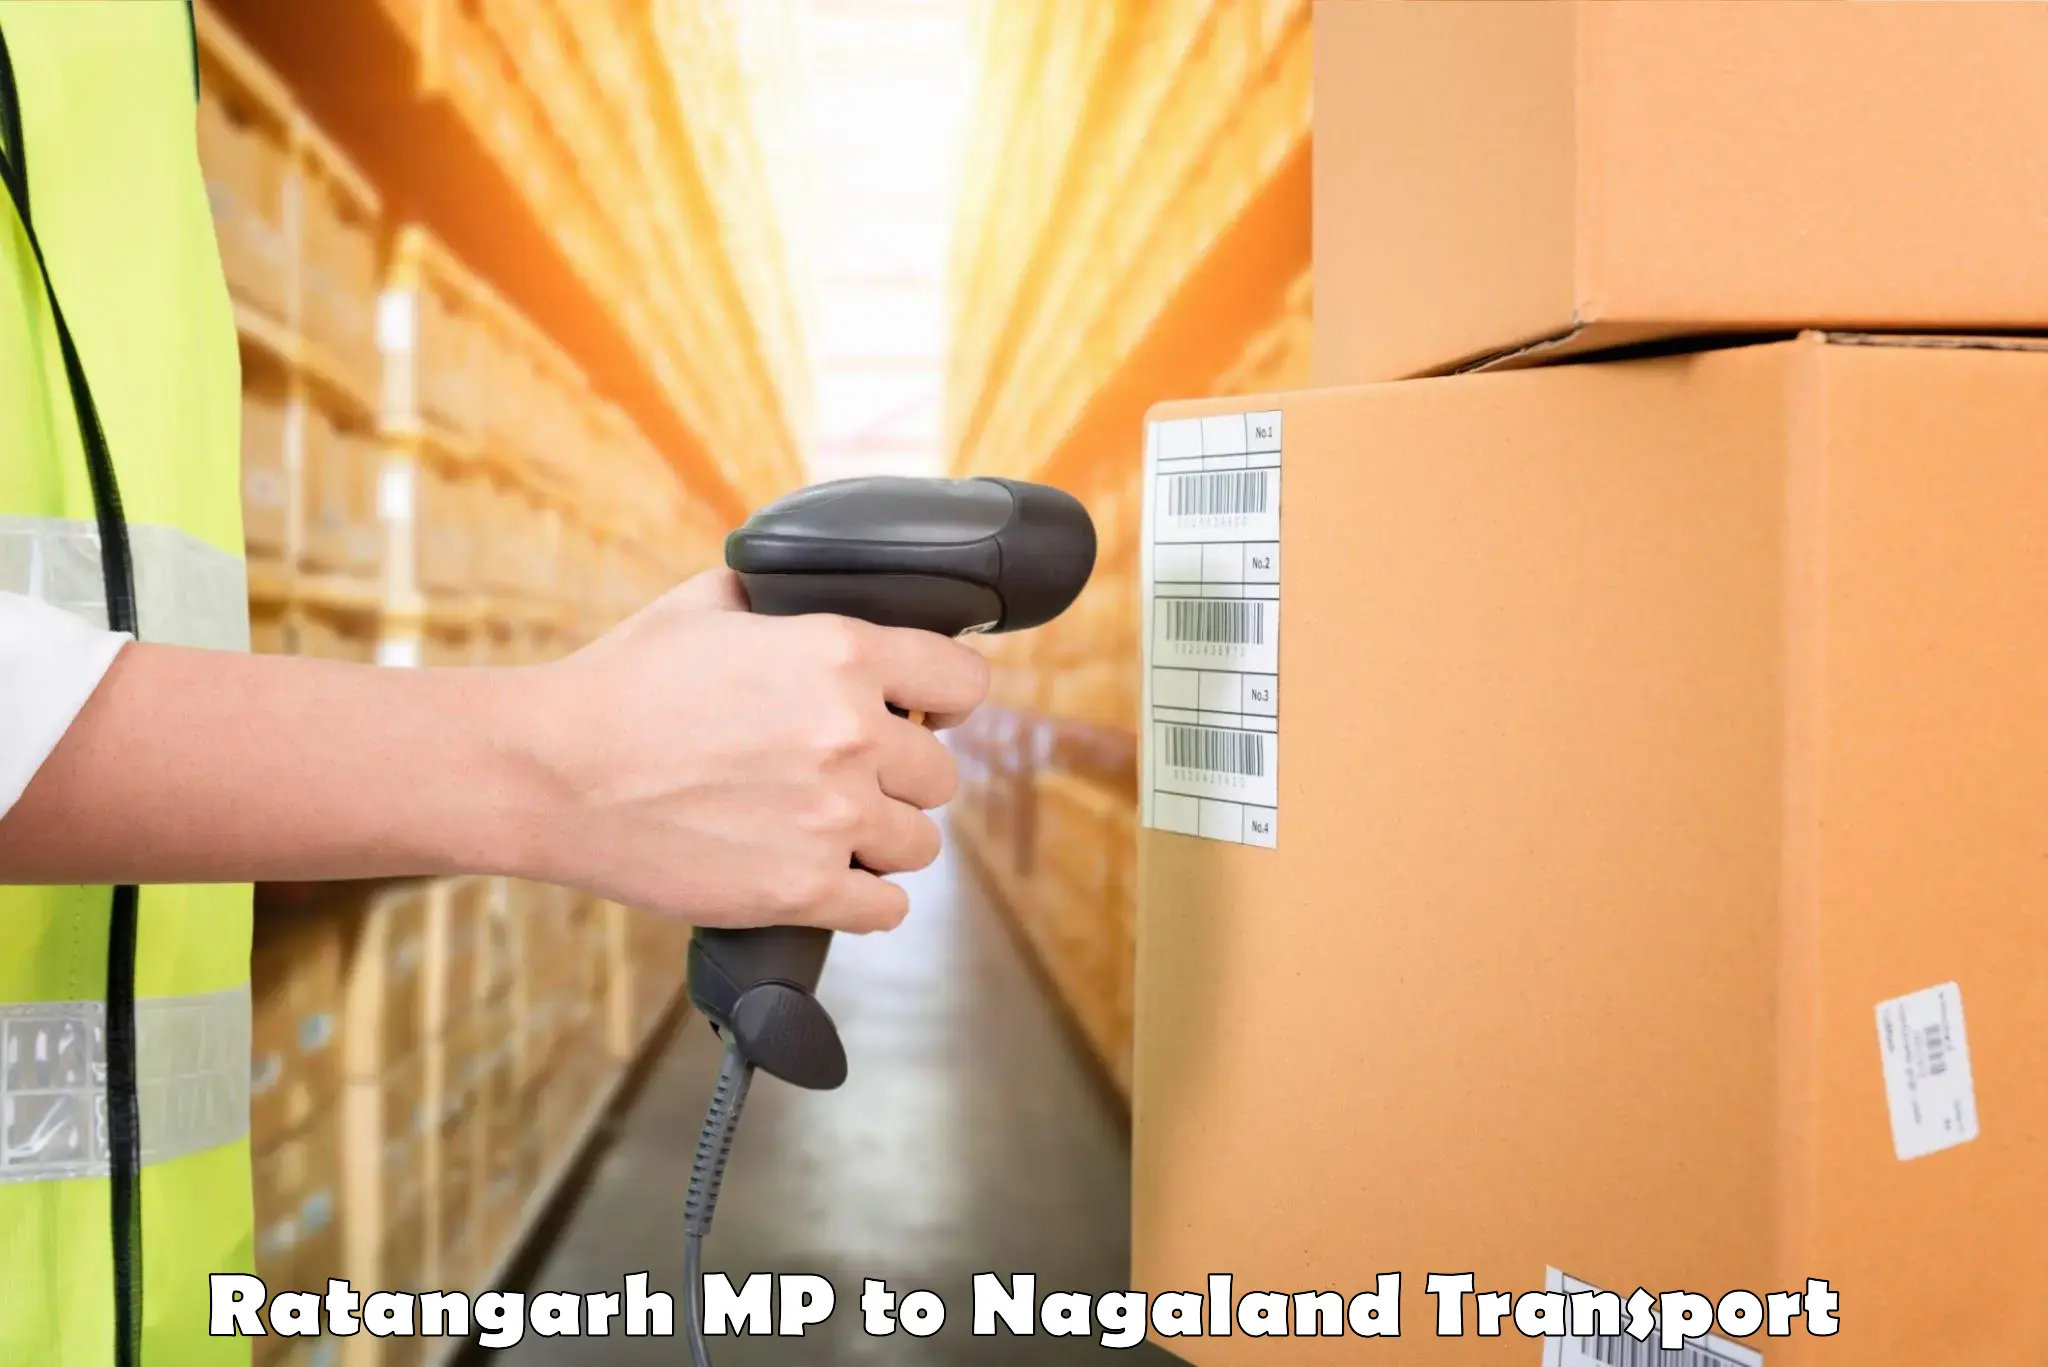 Air freight transport services Ratangarh MP to Dimapur